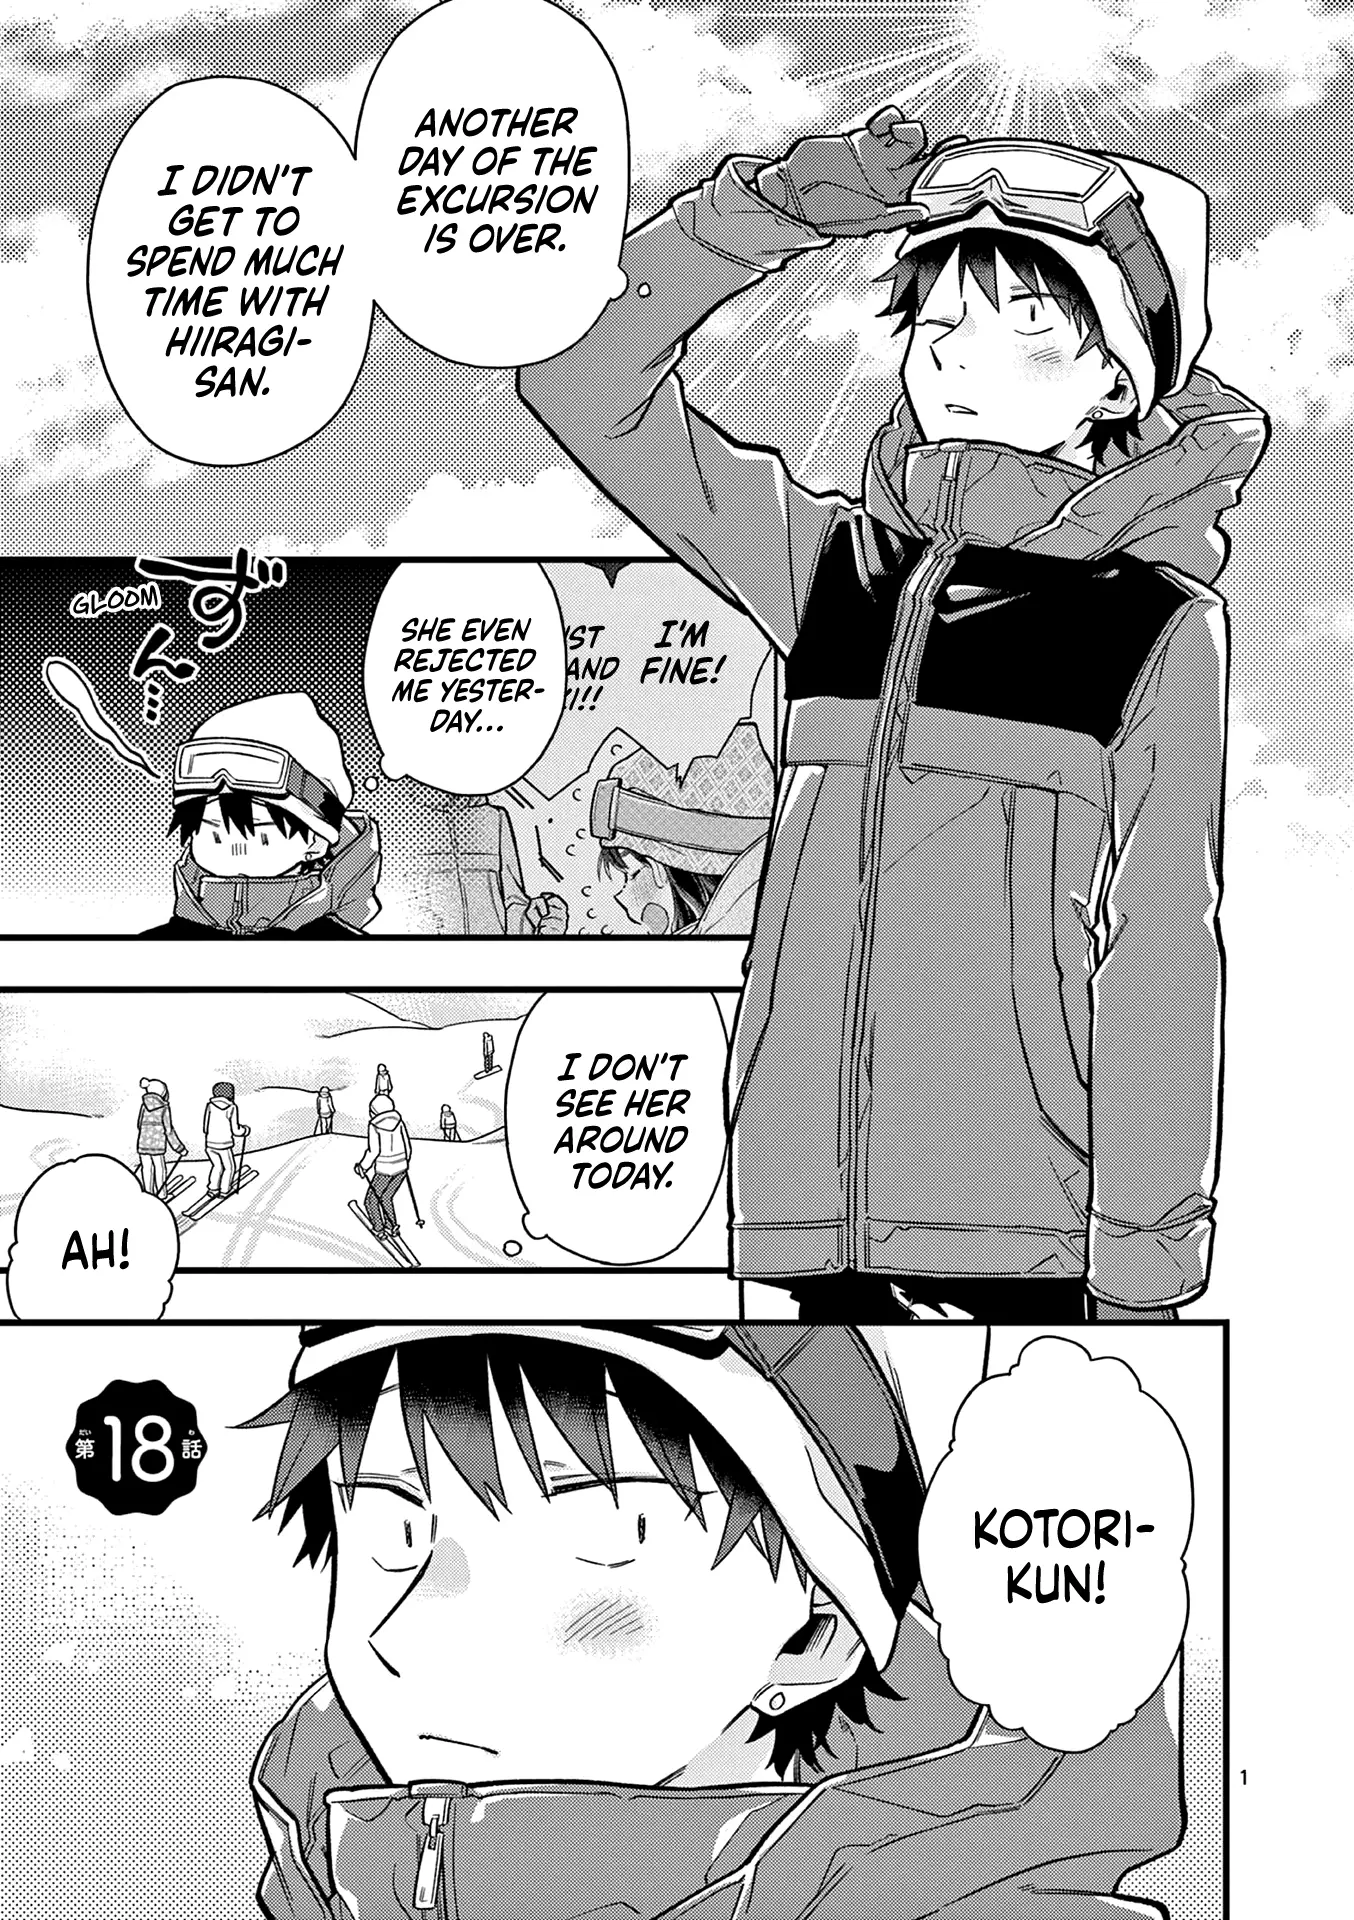 Hiiragi-San Is A Little Careless - 18 page 1-4bff591c